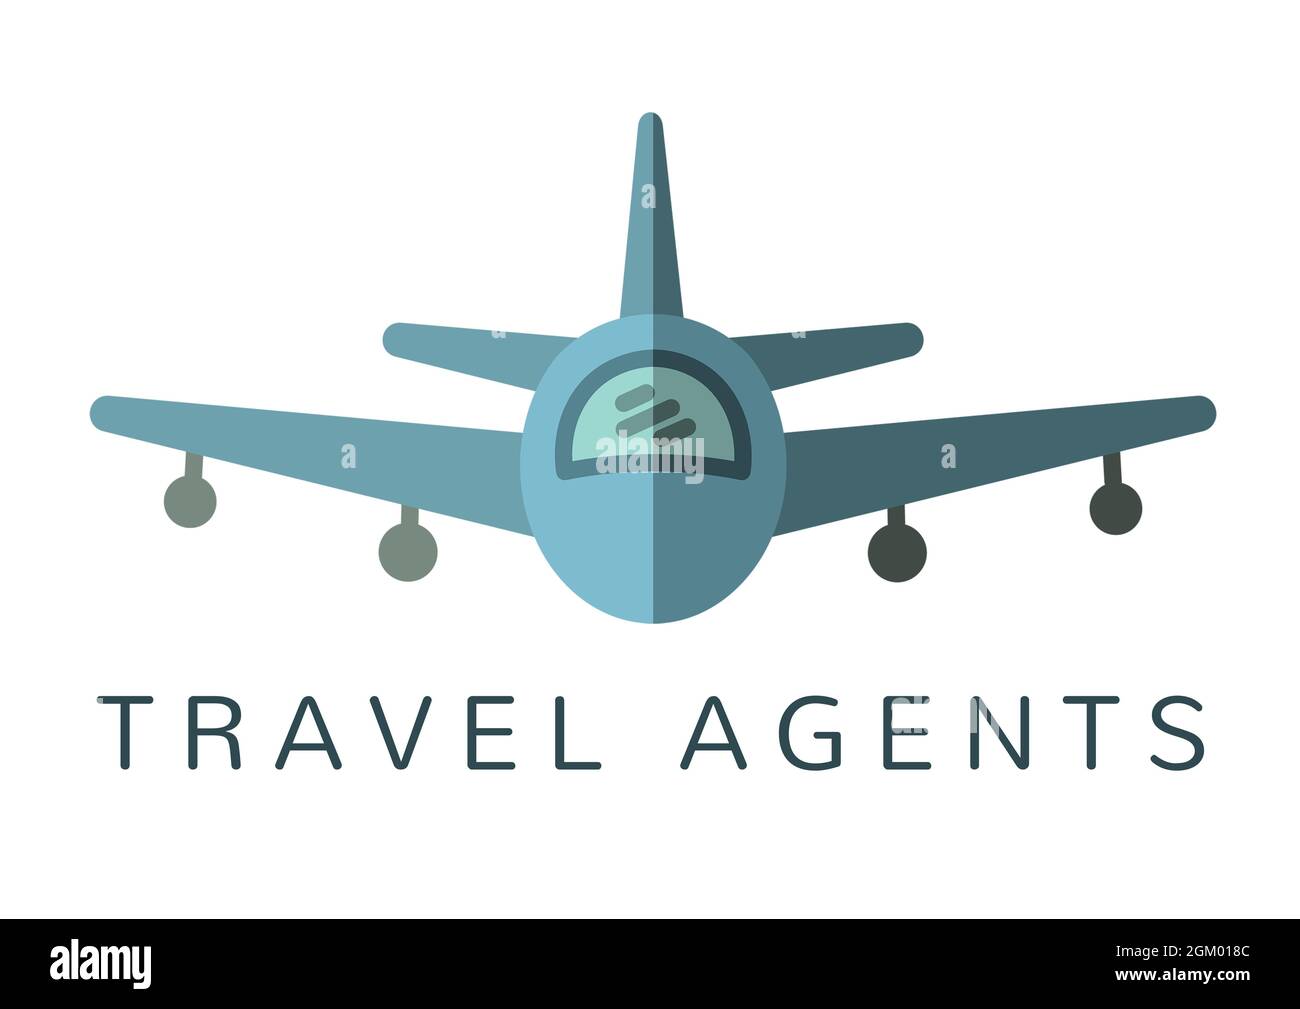 Travel agents text with airplane icon against white background Stock Photo